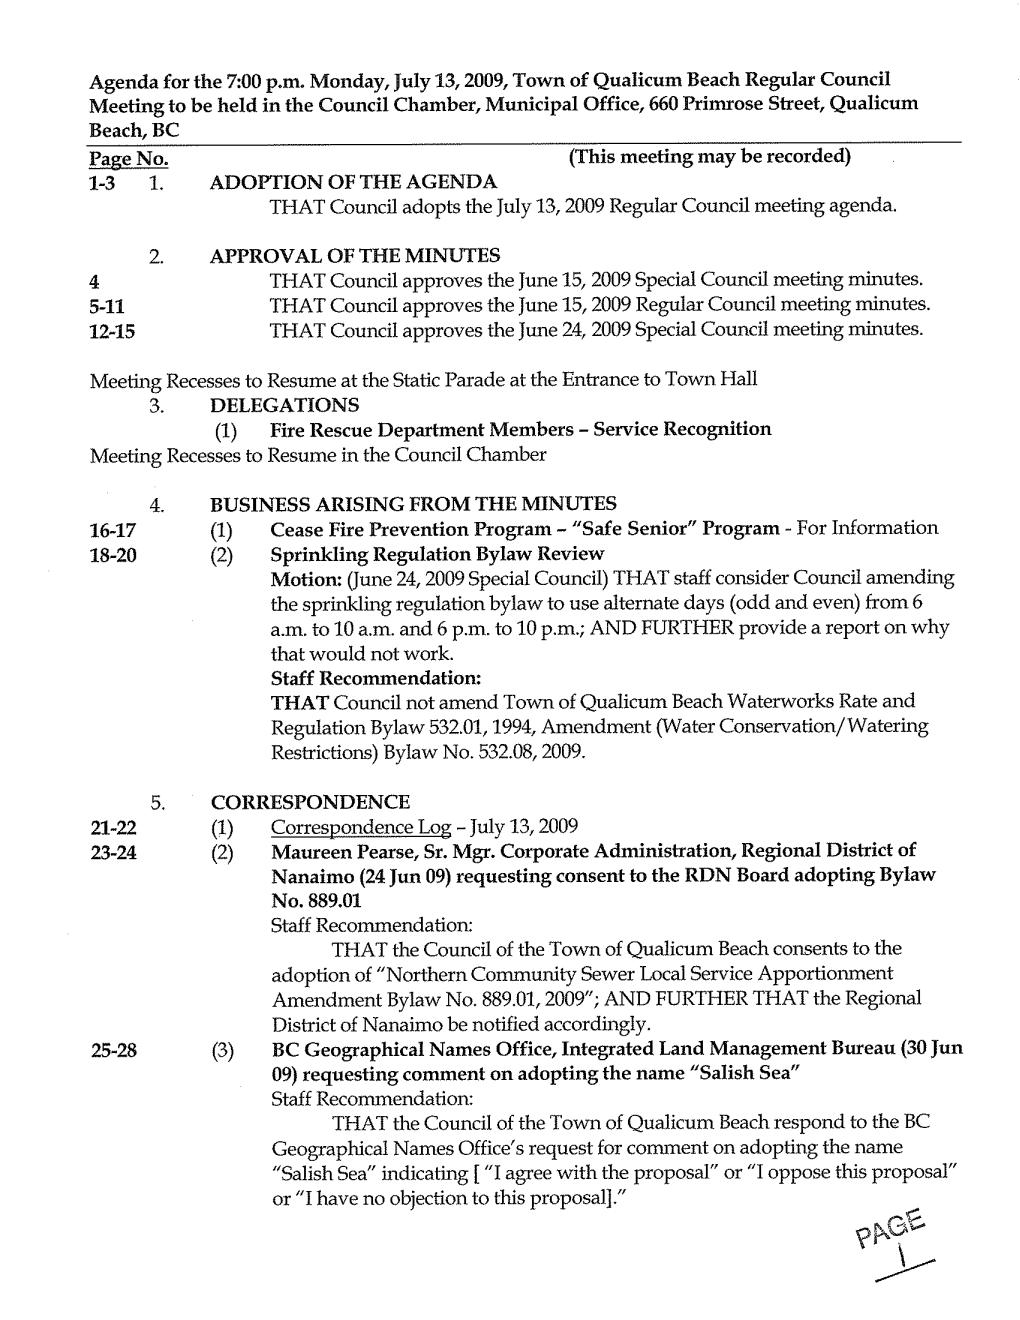 THAT Council Adopts the July 13, 2009 Regular Council Meeting Agenda